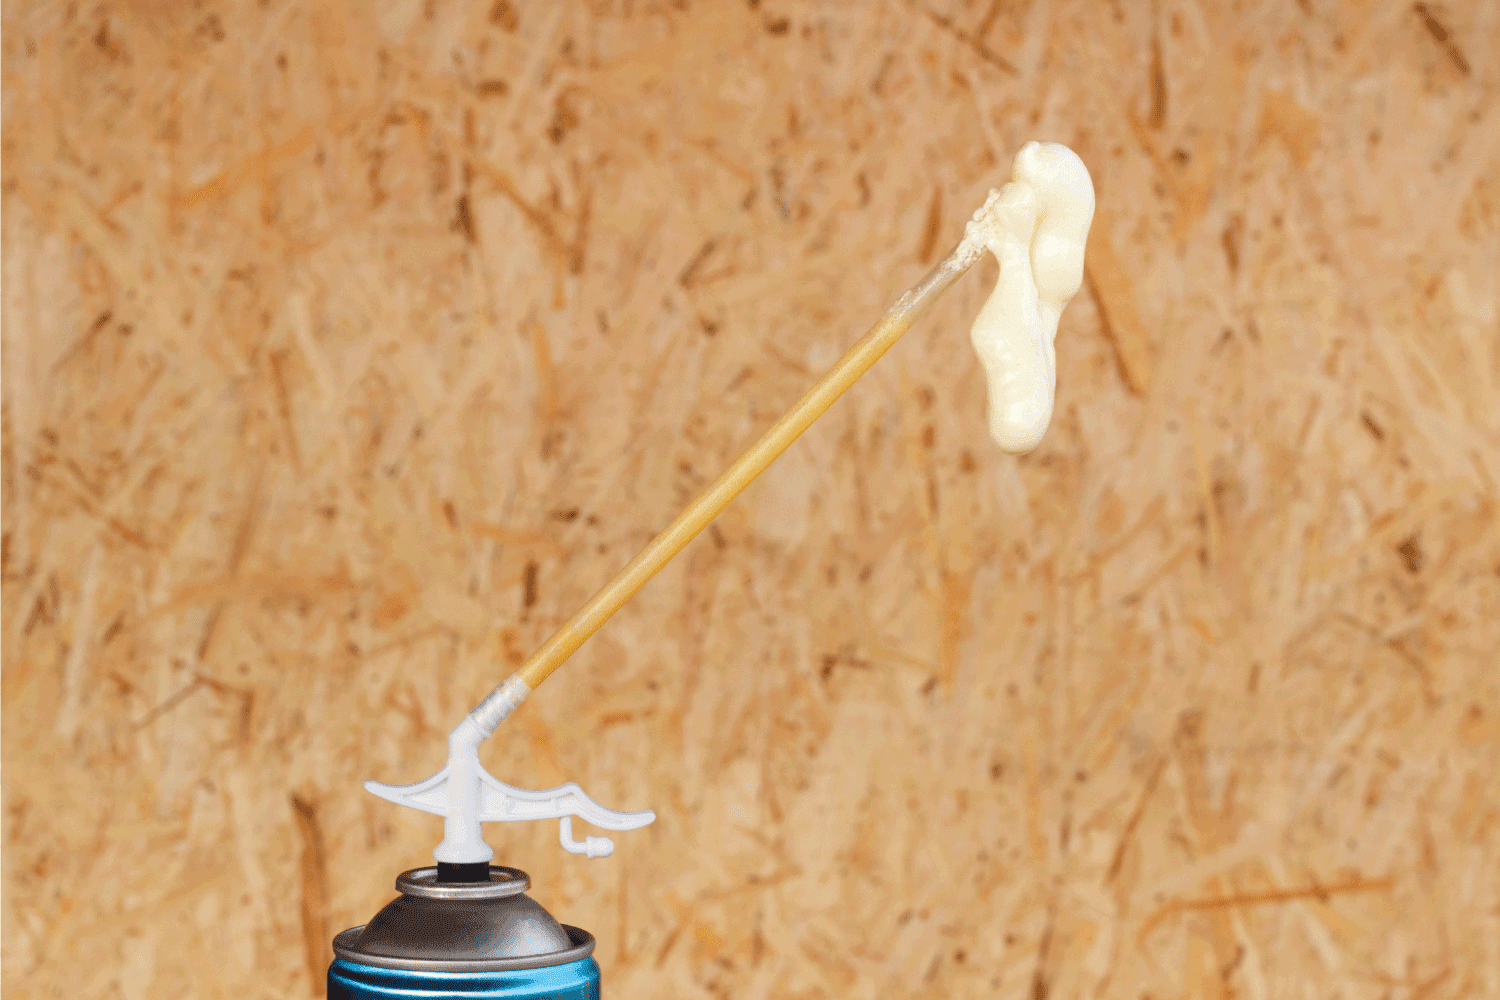 Spray can with construction foam that is used daily construction